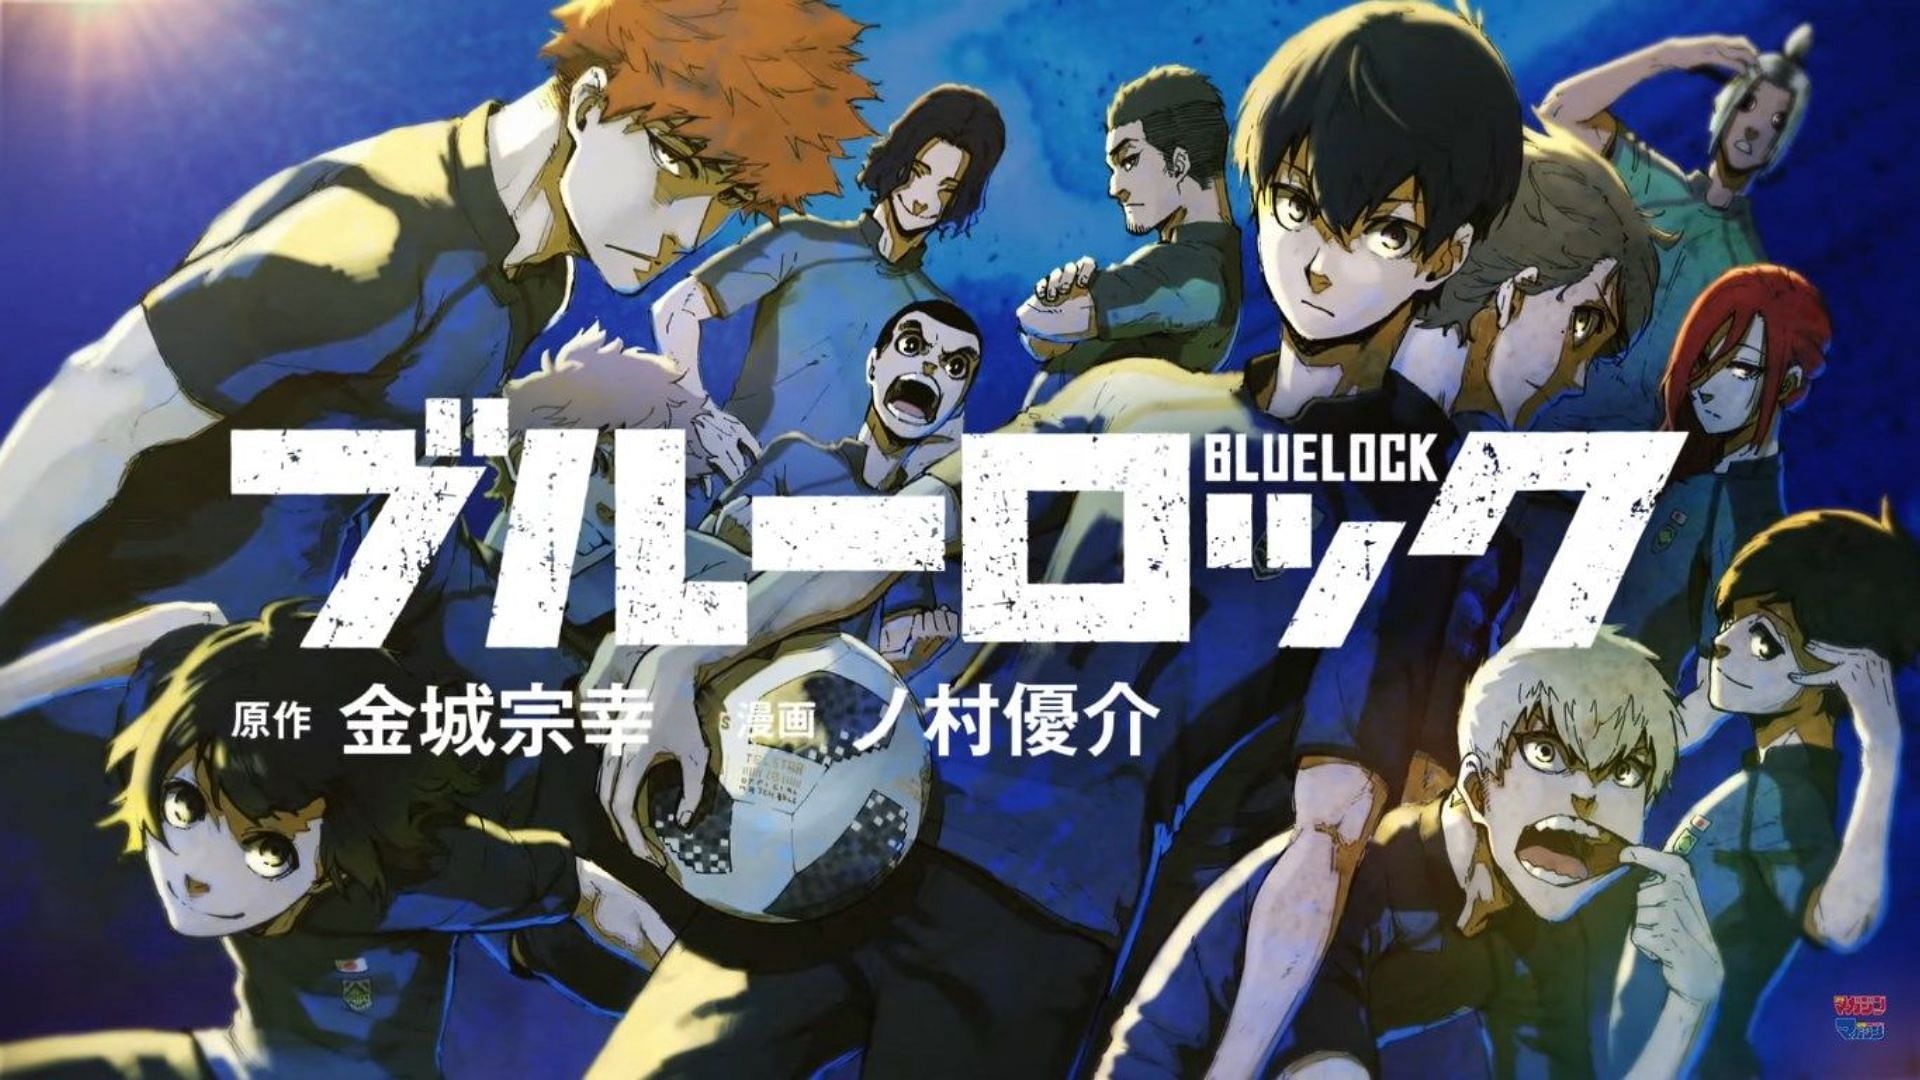 Blue Lock Episode 23: Release Date, Preview